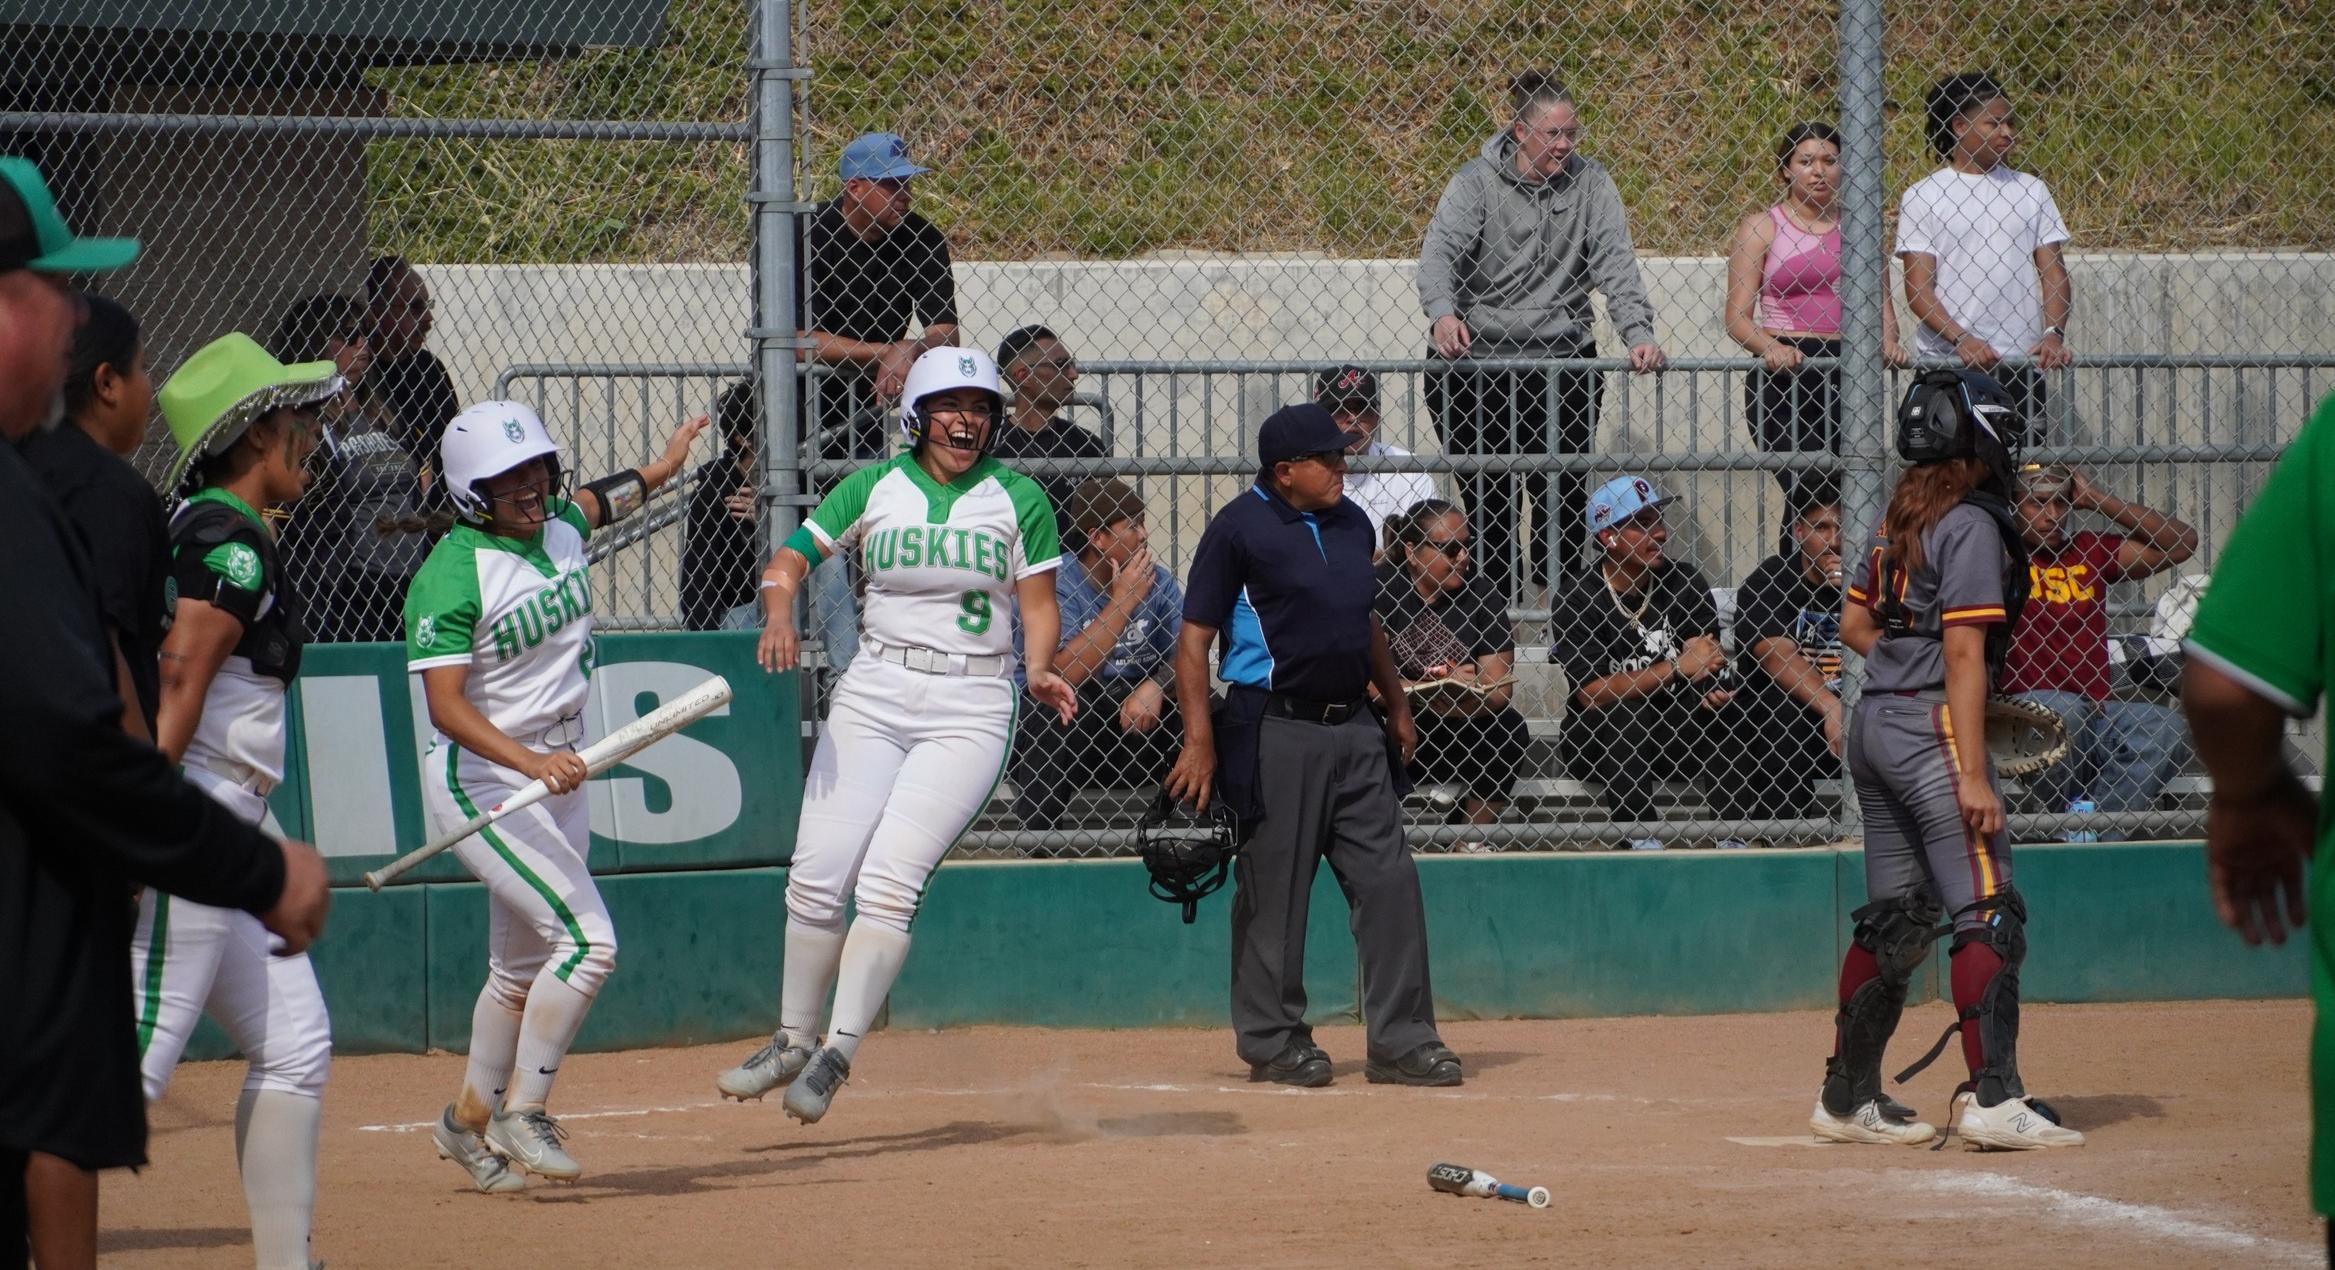 ELAC Plates Three in the Seventh for Wild Comeback Win Over Pasadena City